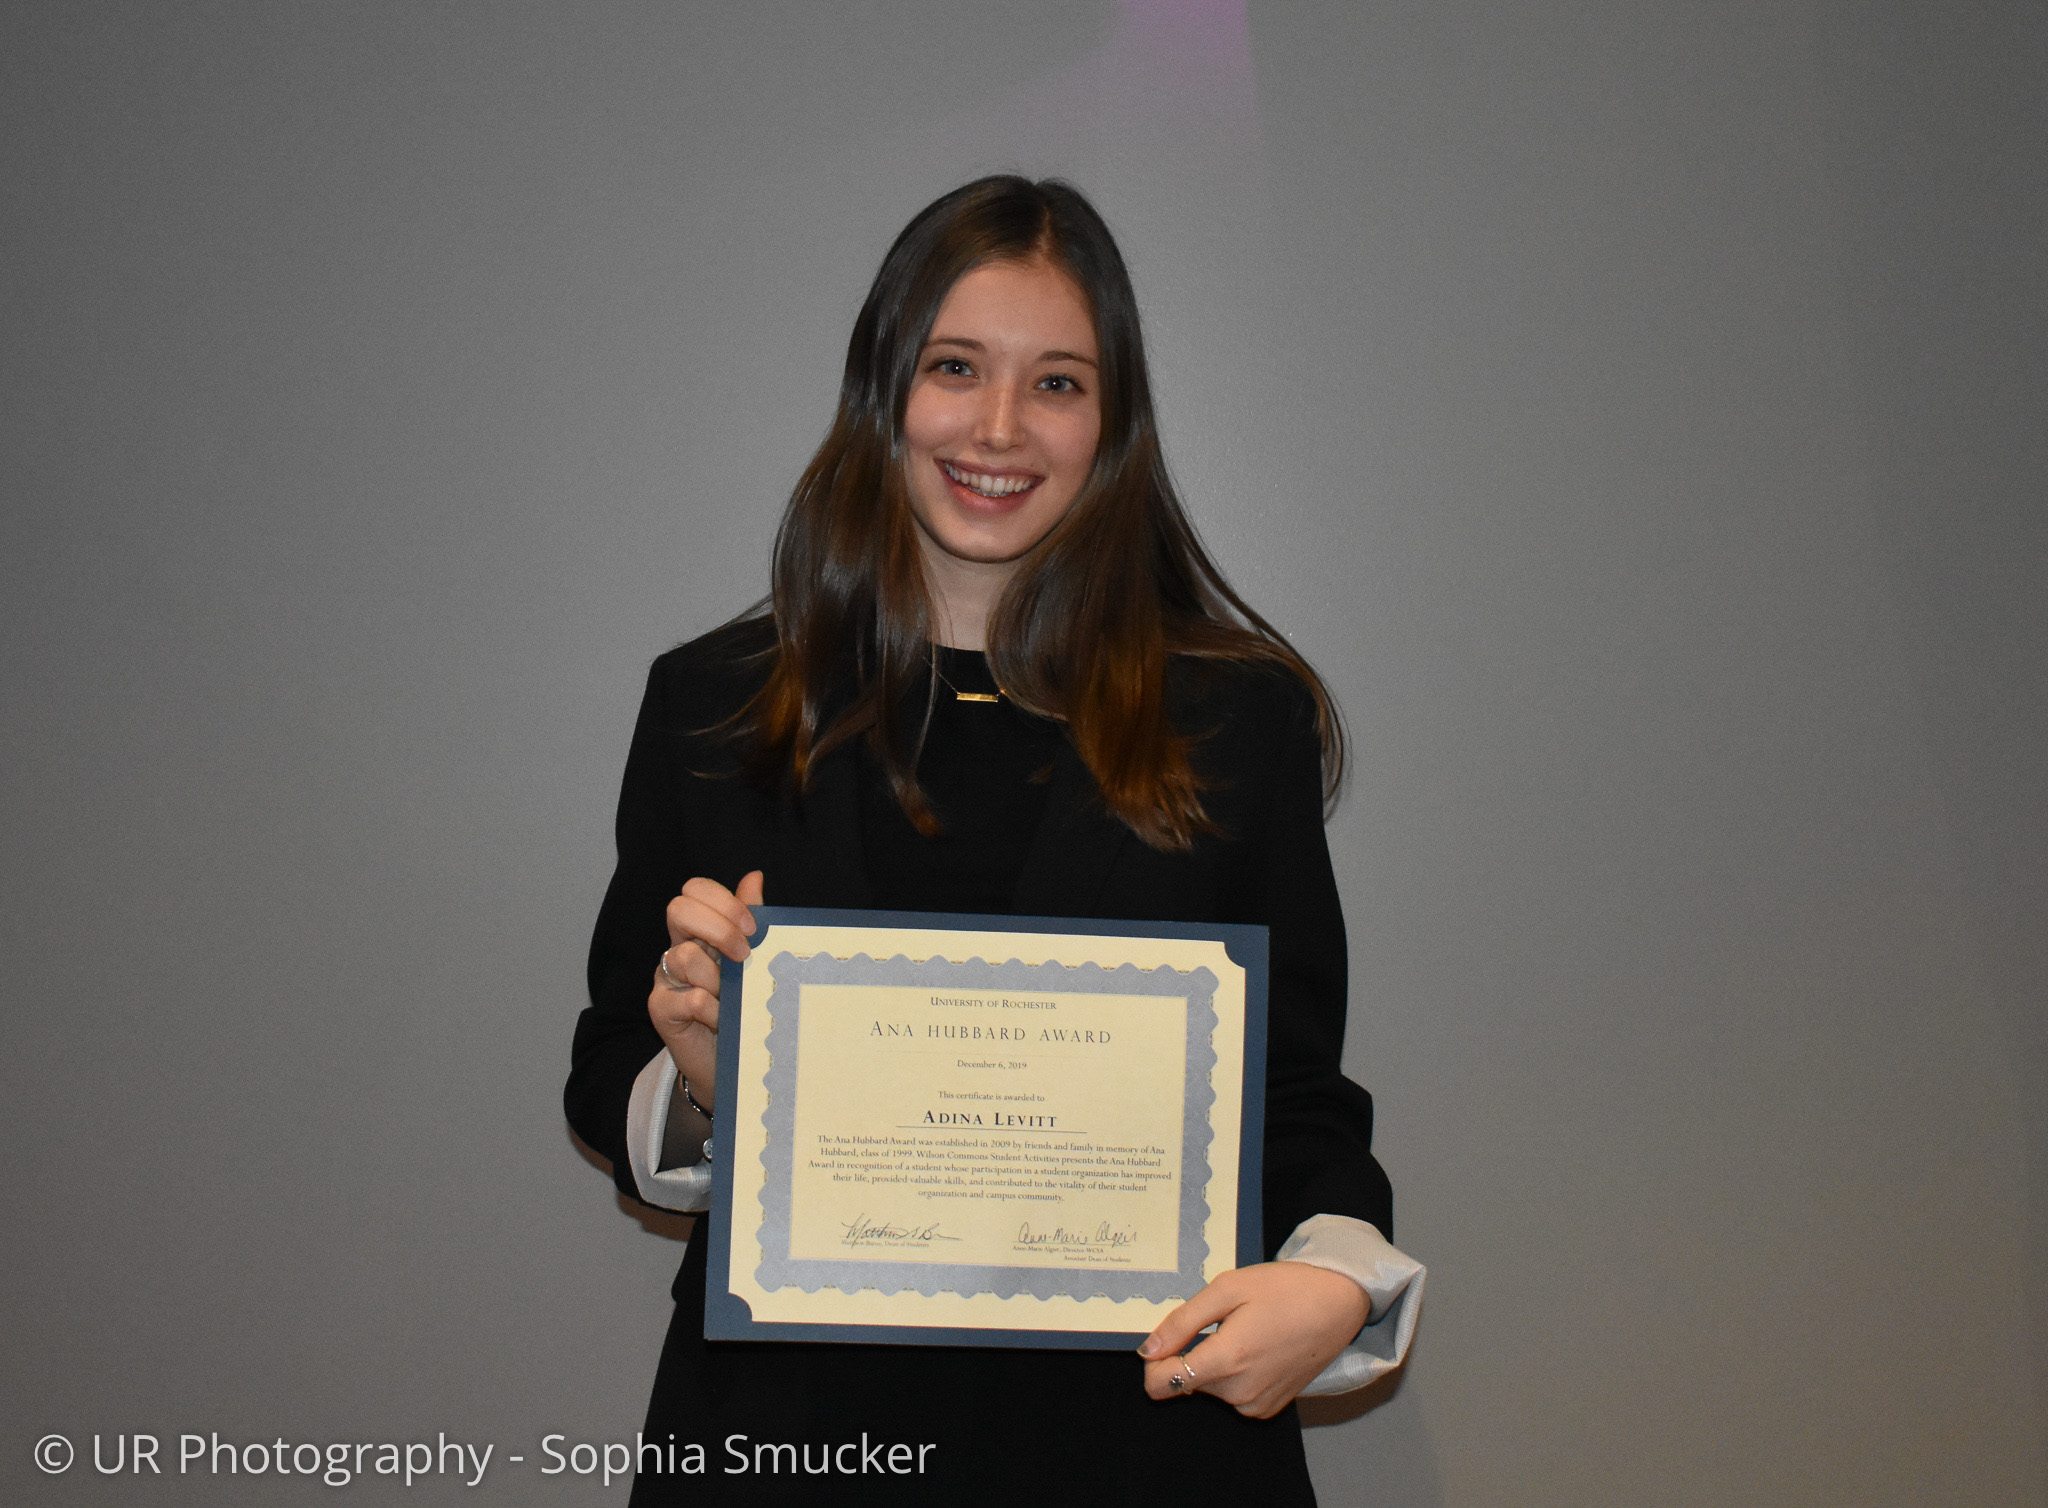 Student holding a certificate while smiling